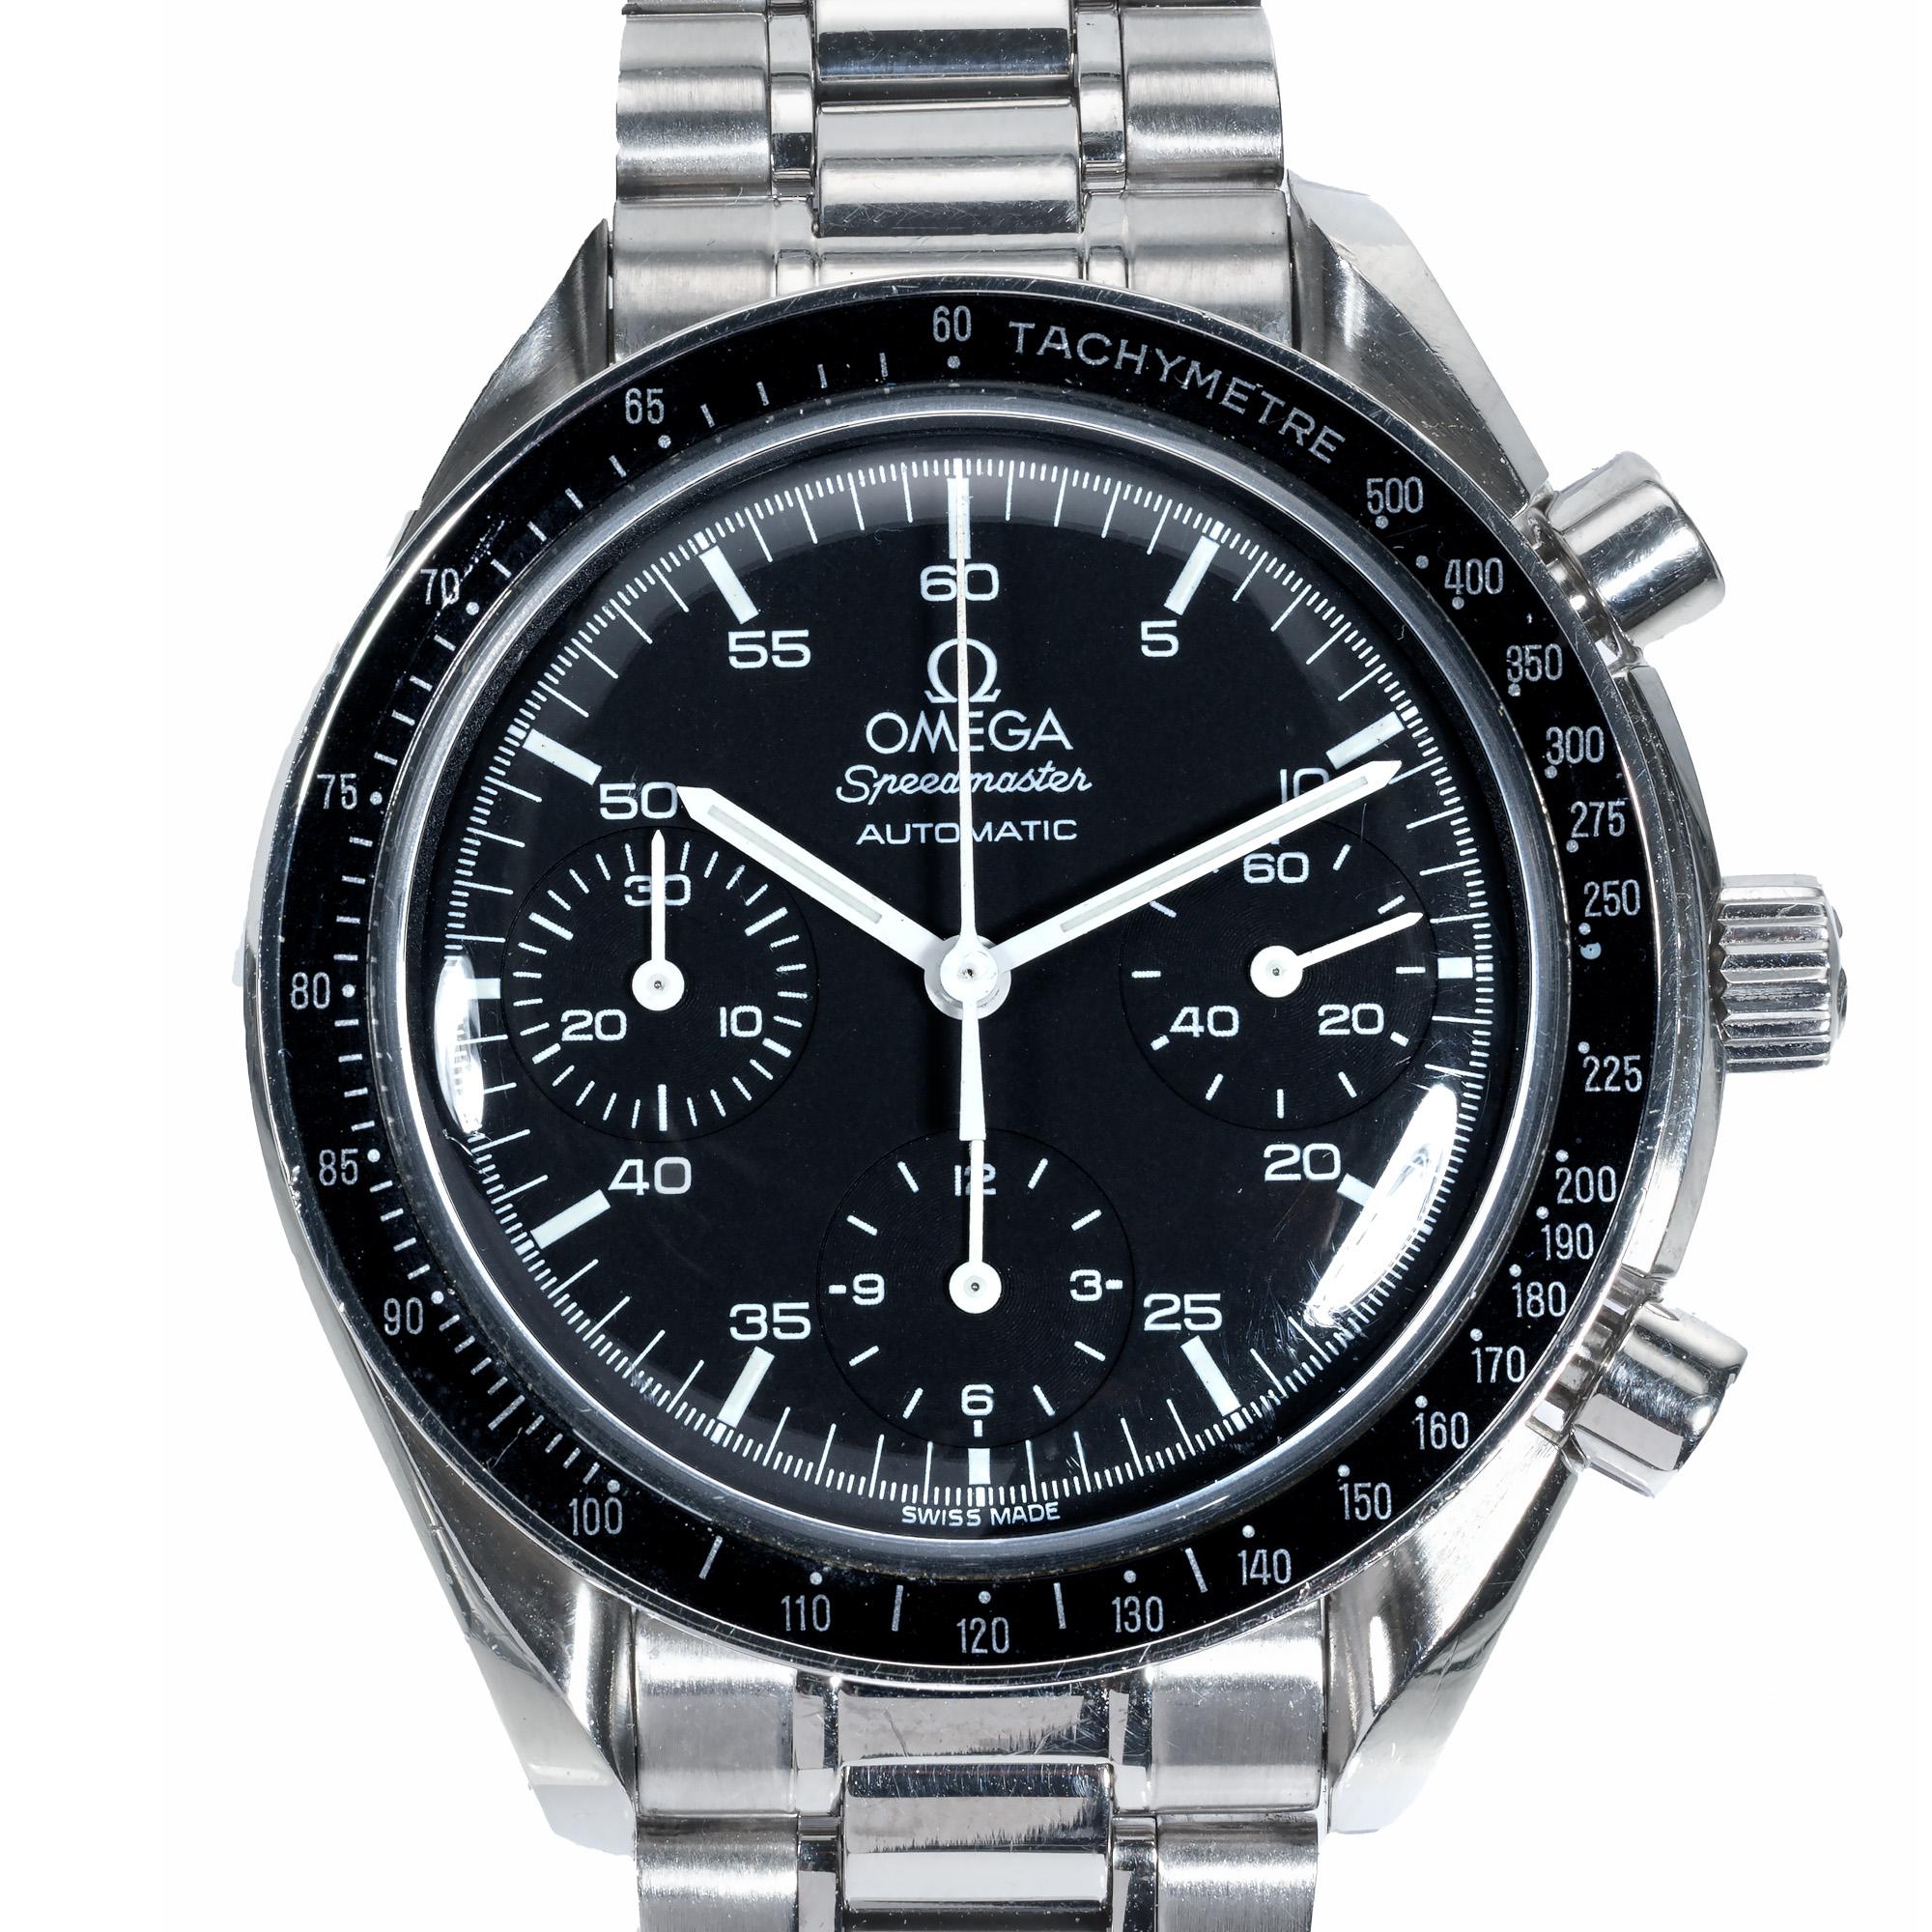 Omega Speedmaster Chronograph men's wristwatch. Stainless steel Omega band, Black dial with stainless steel case and recently serviced. Late 1990's All original Speedmaster. Band is 7.75 Inches long and easily shortened. Seahorse medallion on the